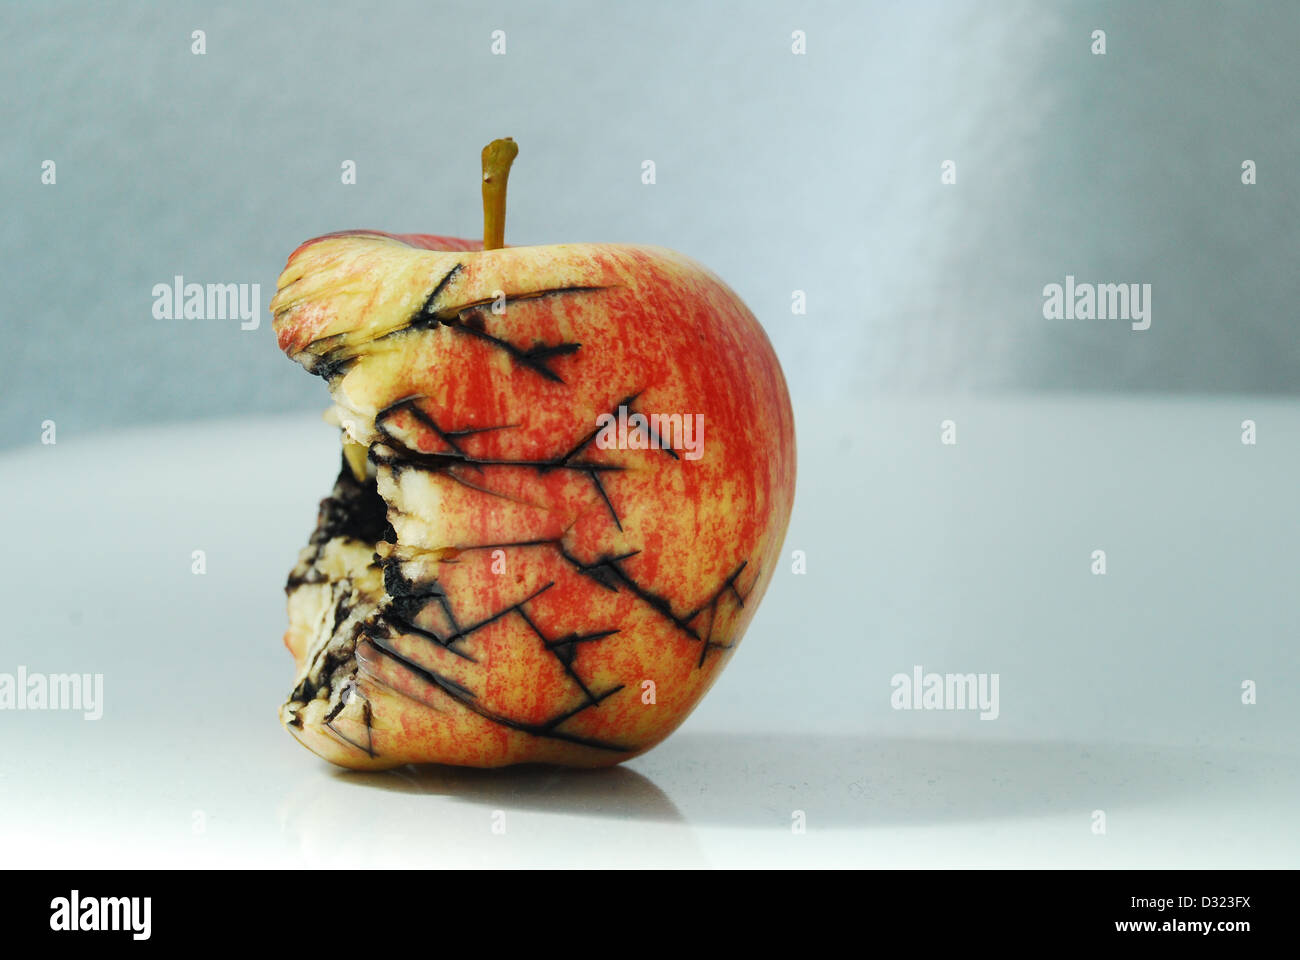 A red and yellow apple on a white background, bitten into with black cracks and mold showing decay and rotting fruit Stock Photo